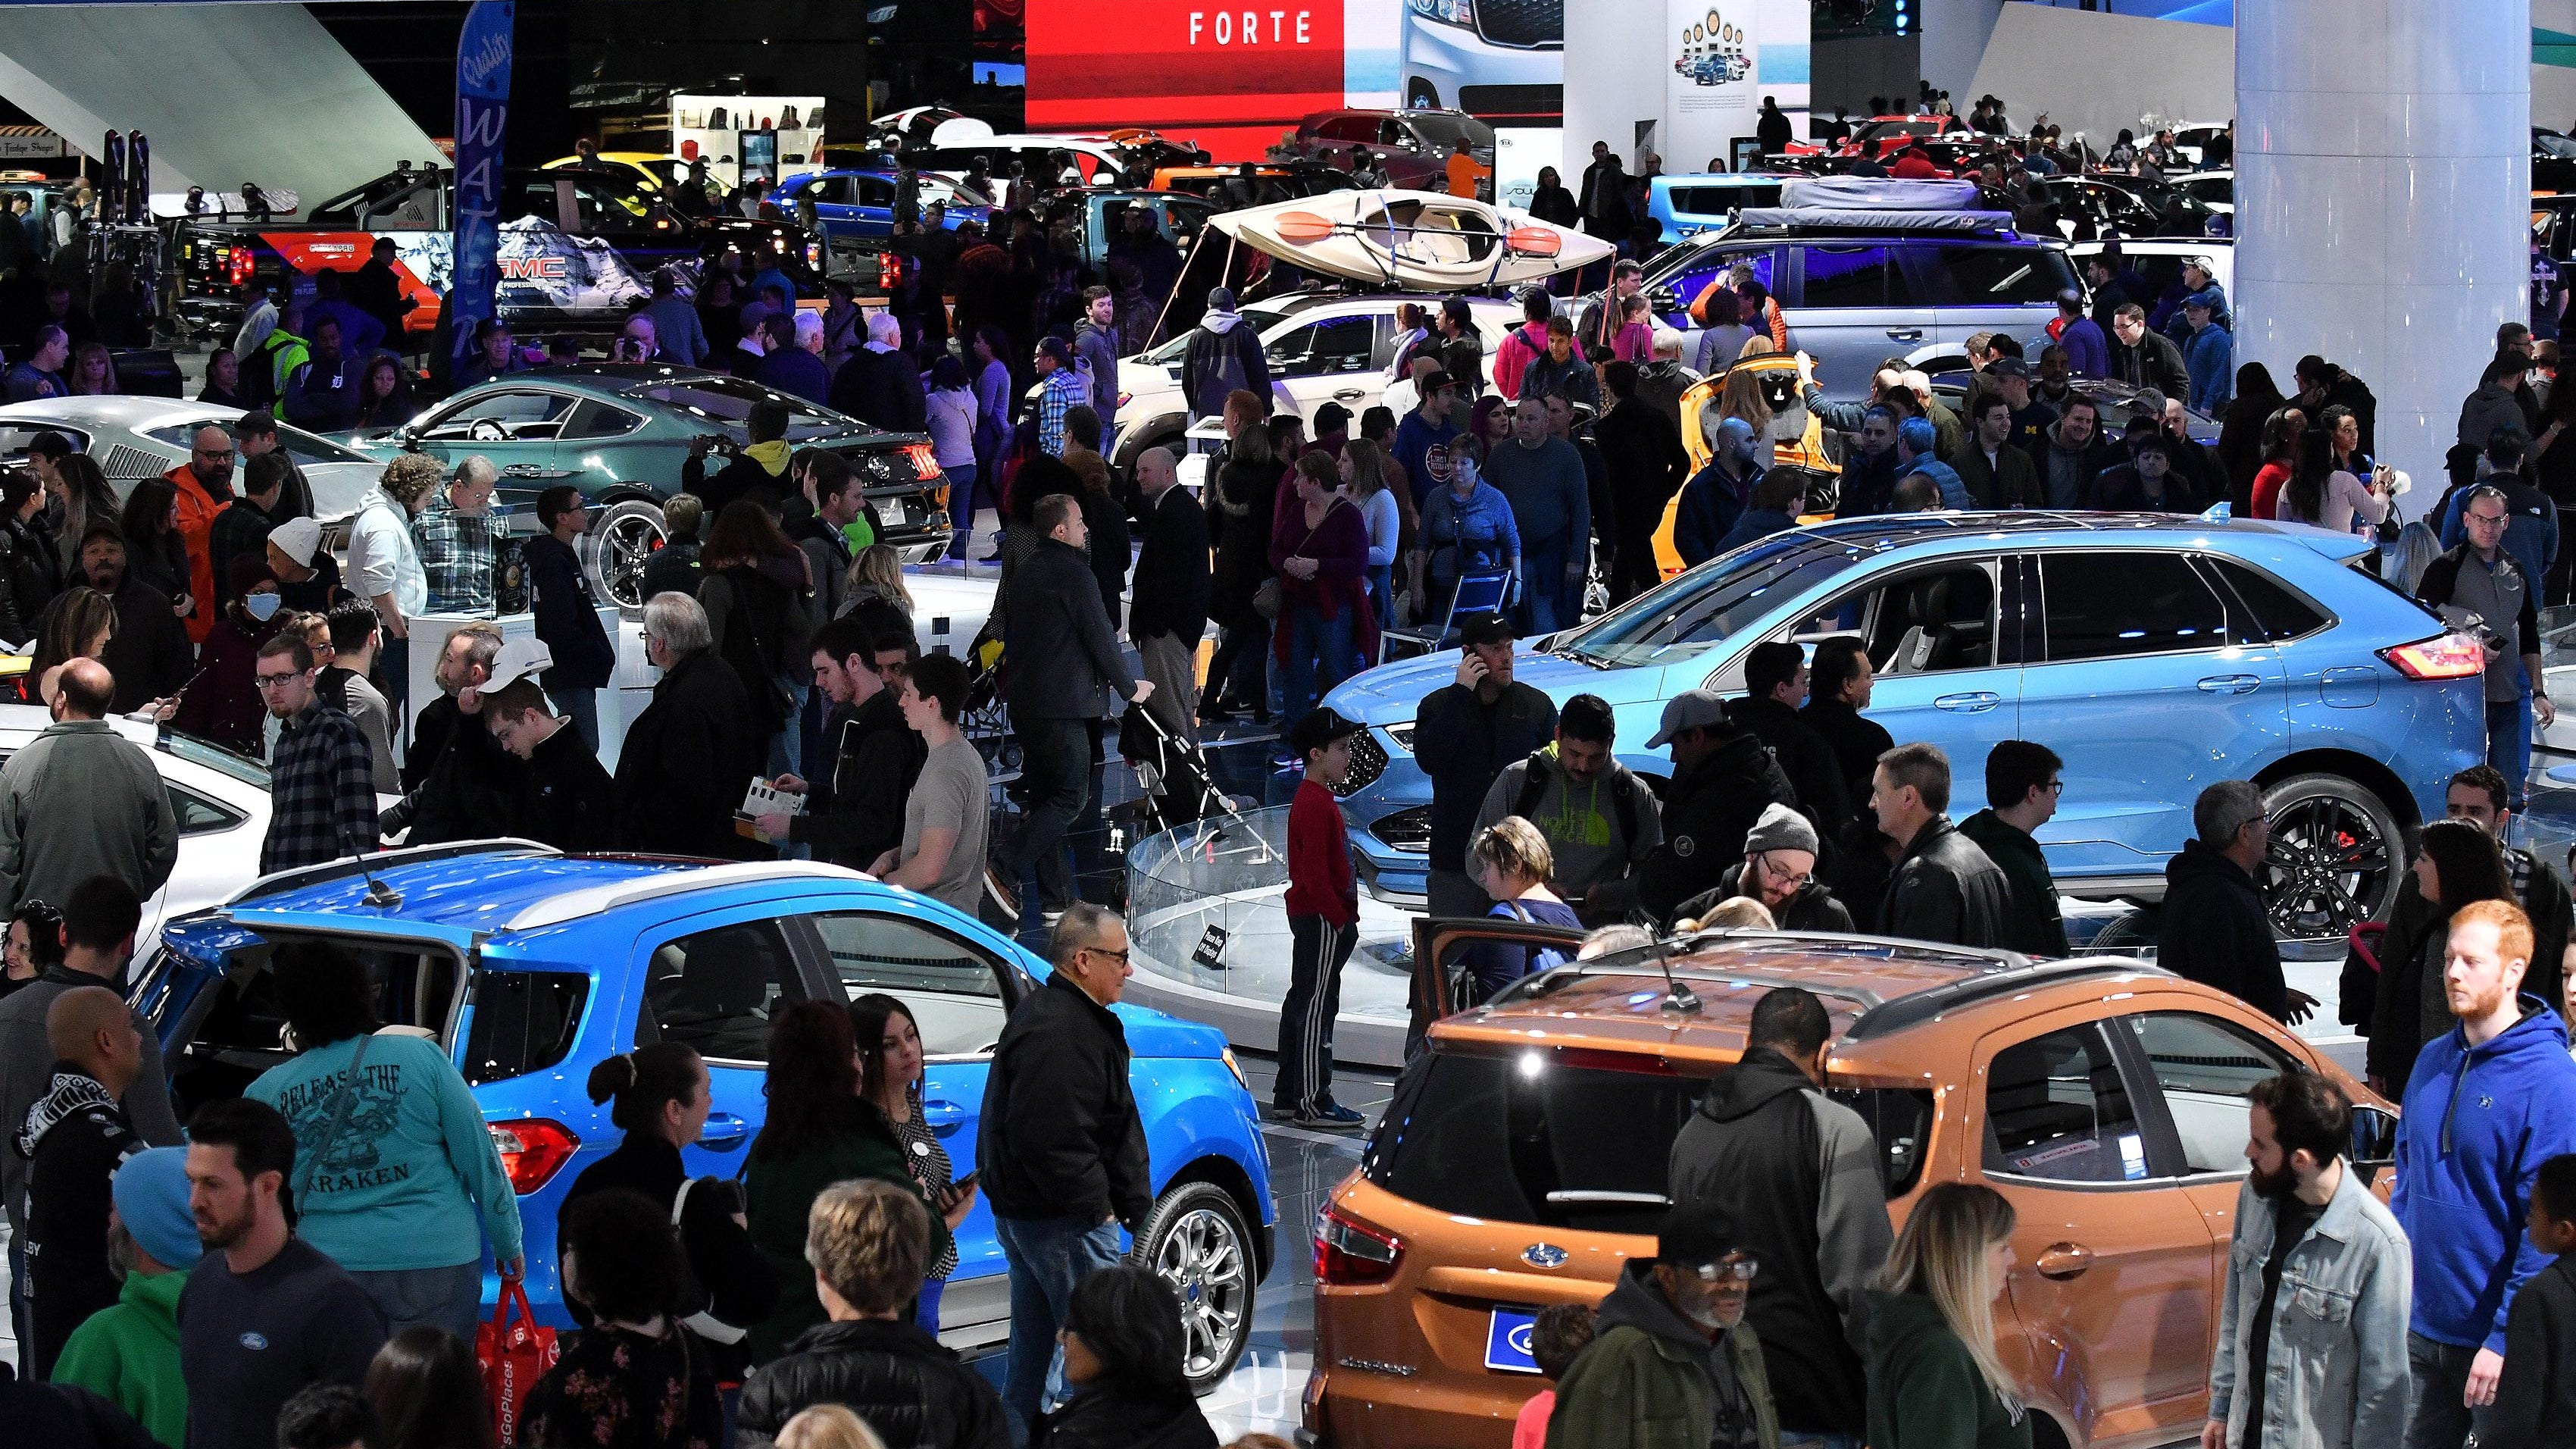 Crowds flow amongst the vehicles at the final day of the North American International Auto Show at Cobo Center in Detroit on Jan. 28, 2018. Organizers of Detroit’s big auto show are talking about moving it from frigid January to October starting as early as 2020.